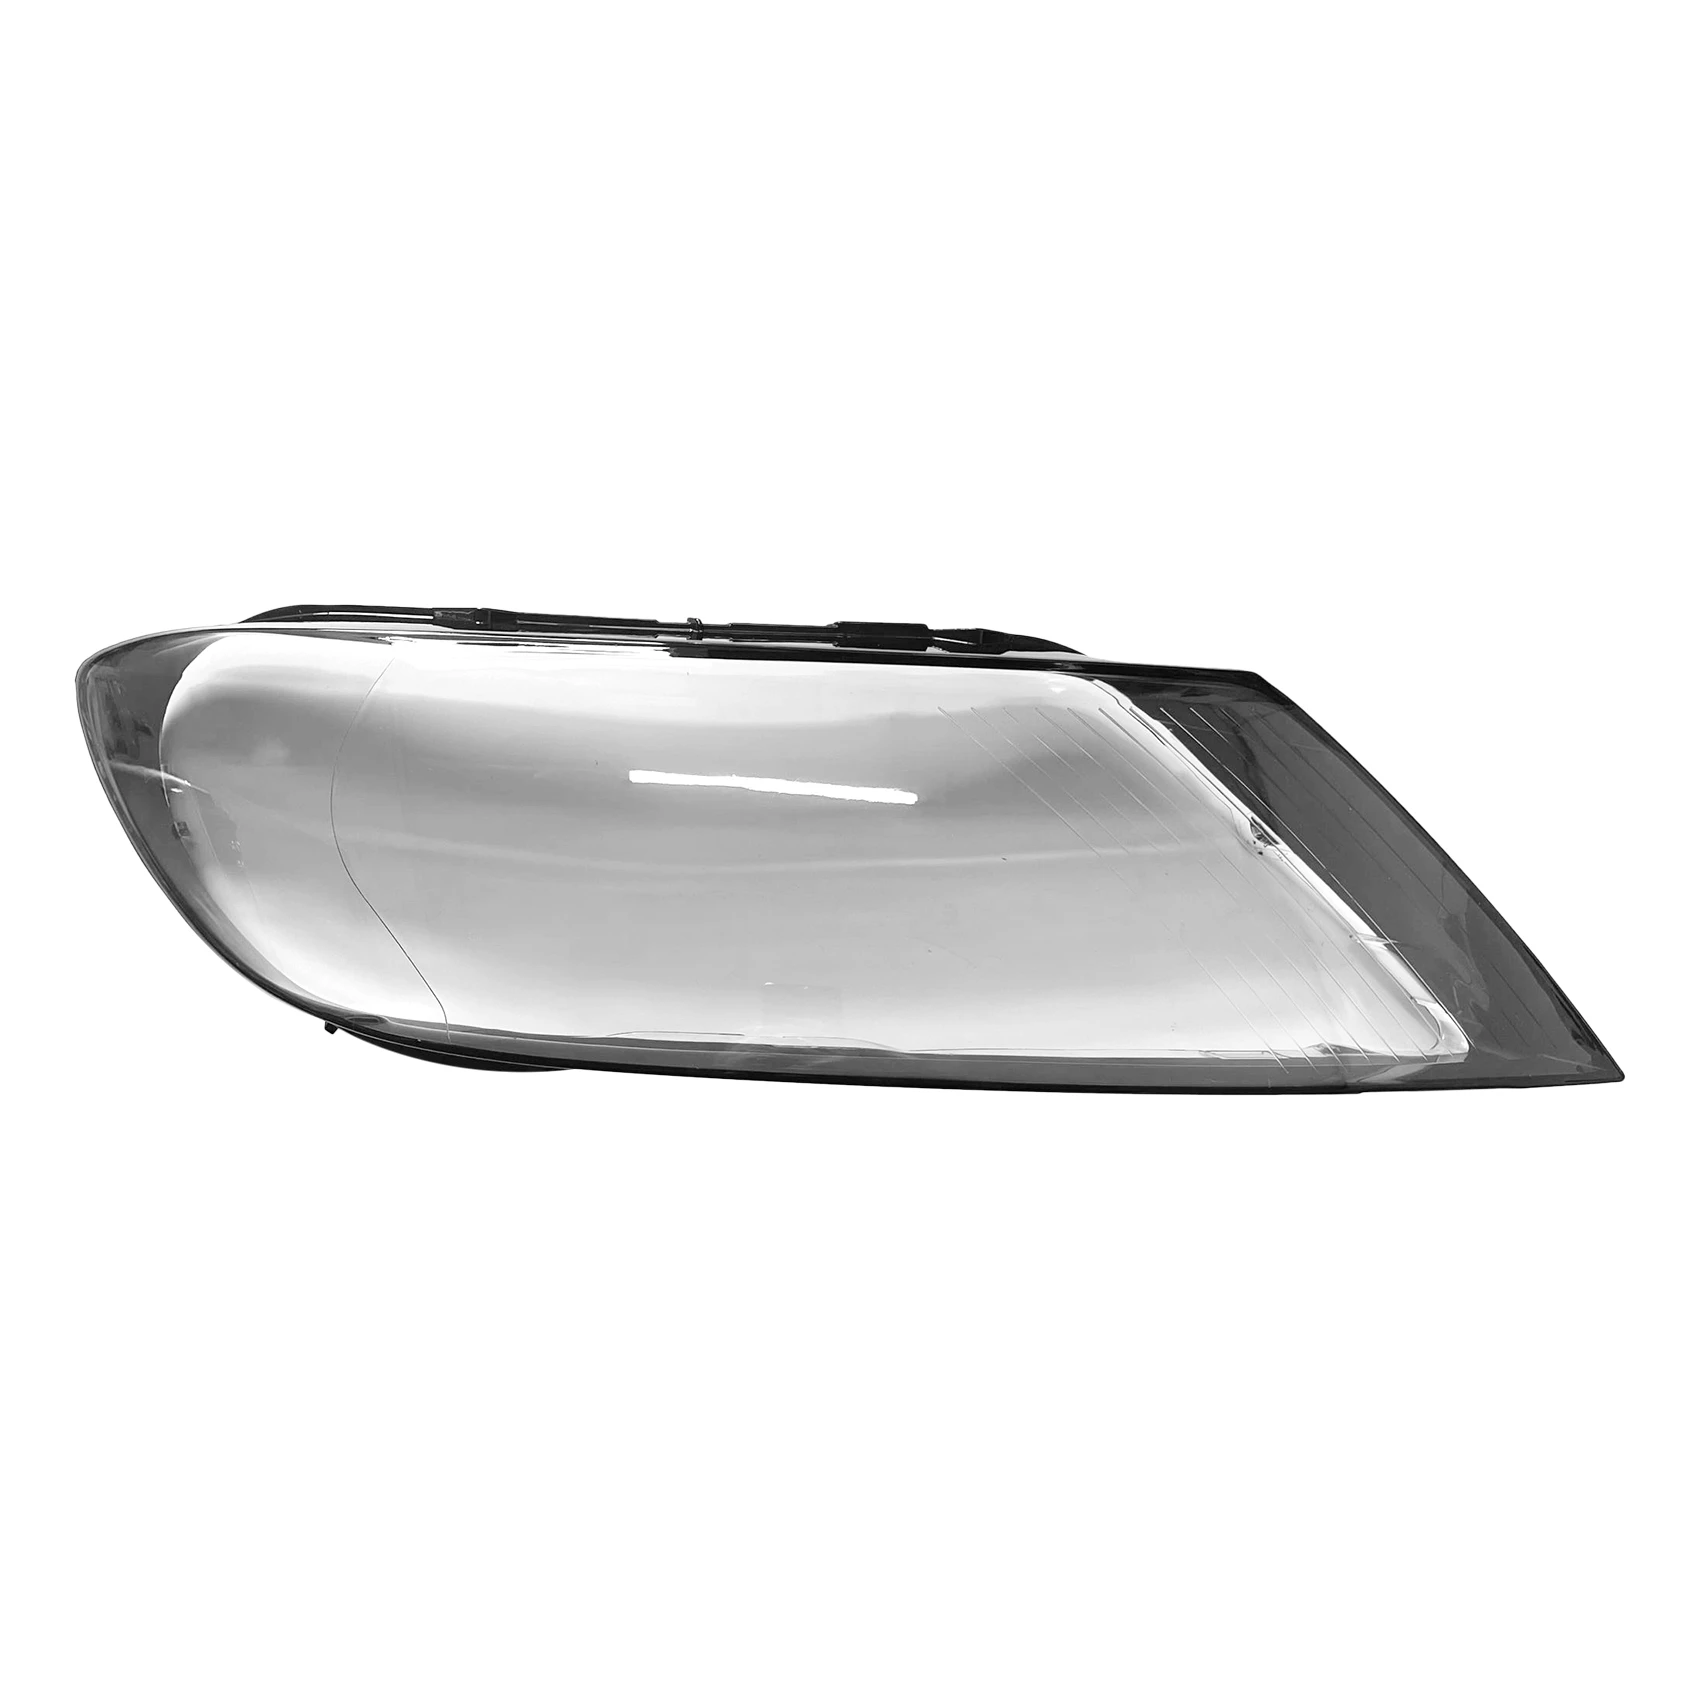 

Car Right Front Headlight Cover Lampshade Waterproof Bright Shell For-Phaeton 2011-2015 Lamp Clear Lens Cover